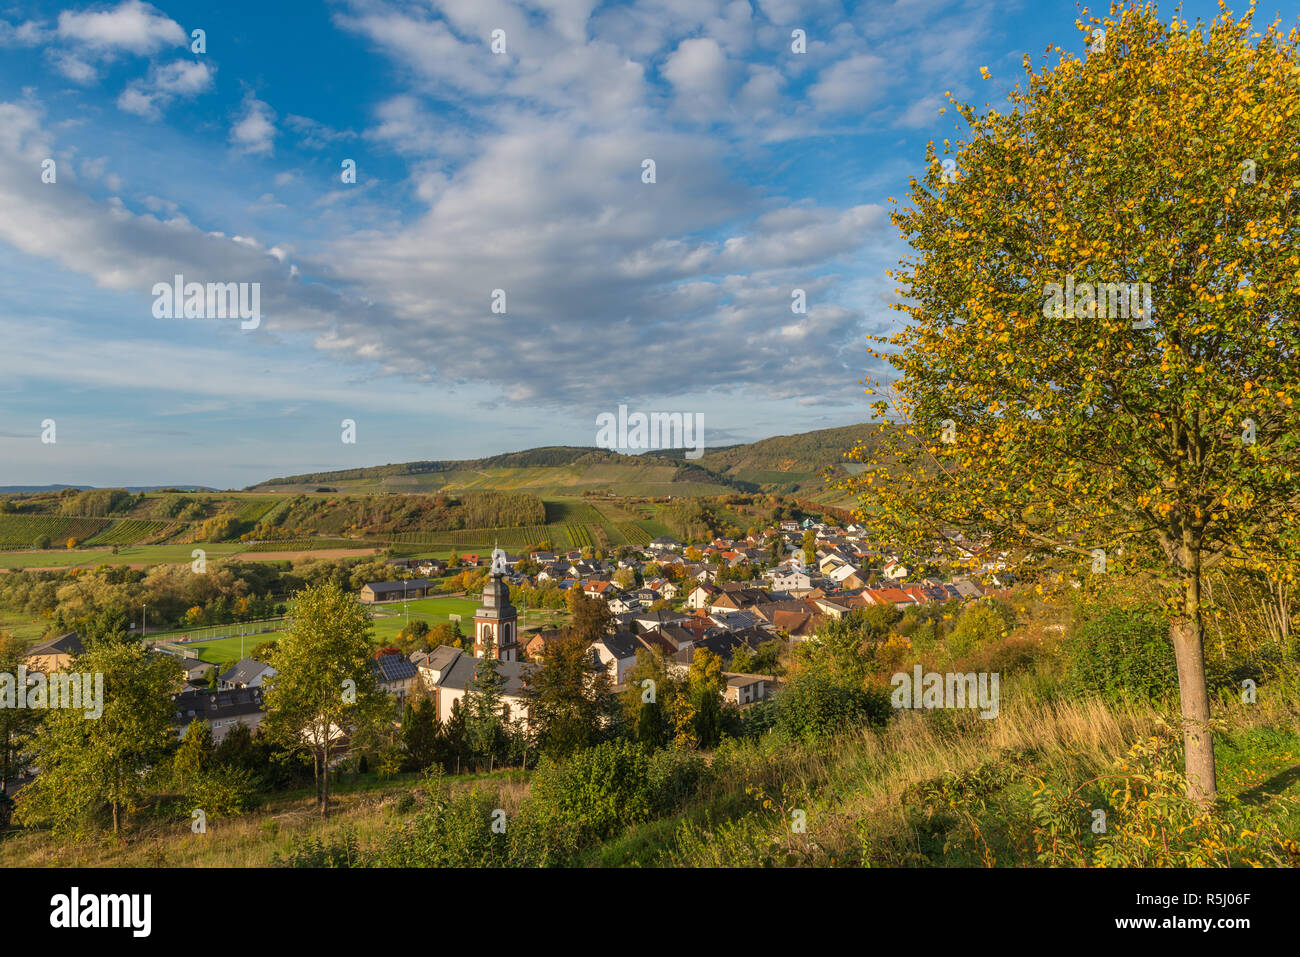 The village of Irsch, Saarburg,  in the middle of vineyards and the hilly landscape of Rhineland-Palantine, Germany, Europe Stock Photo